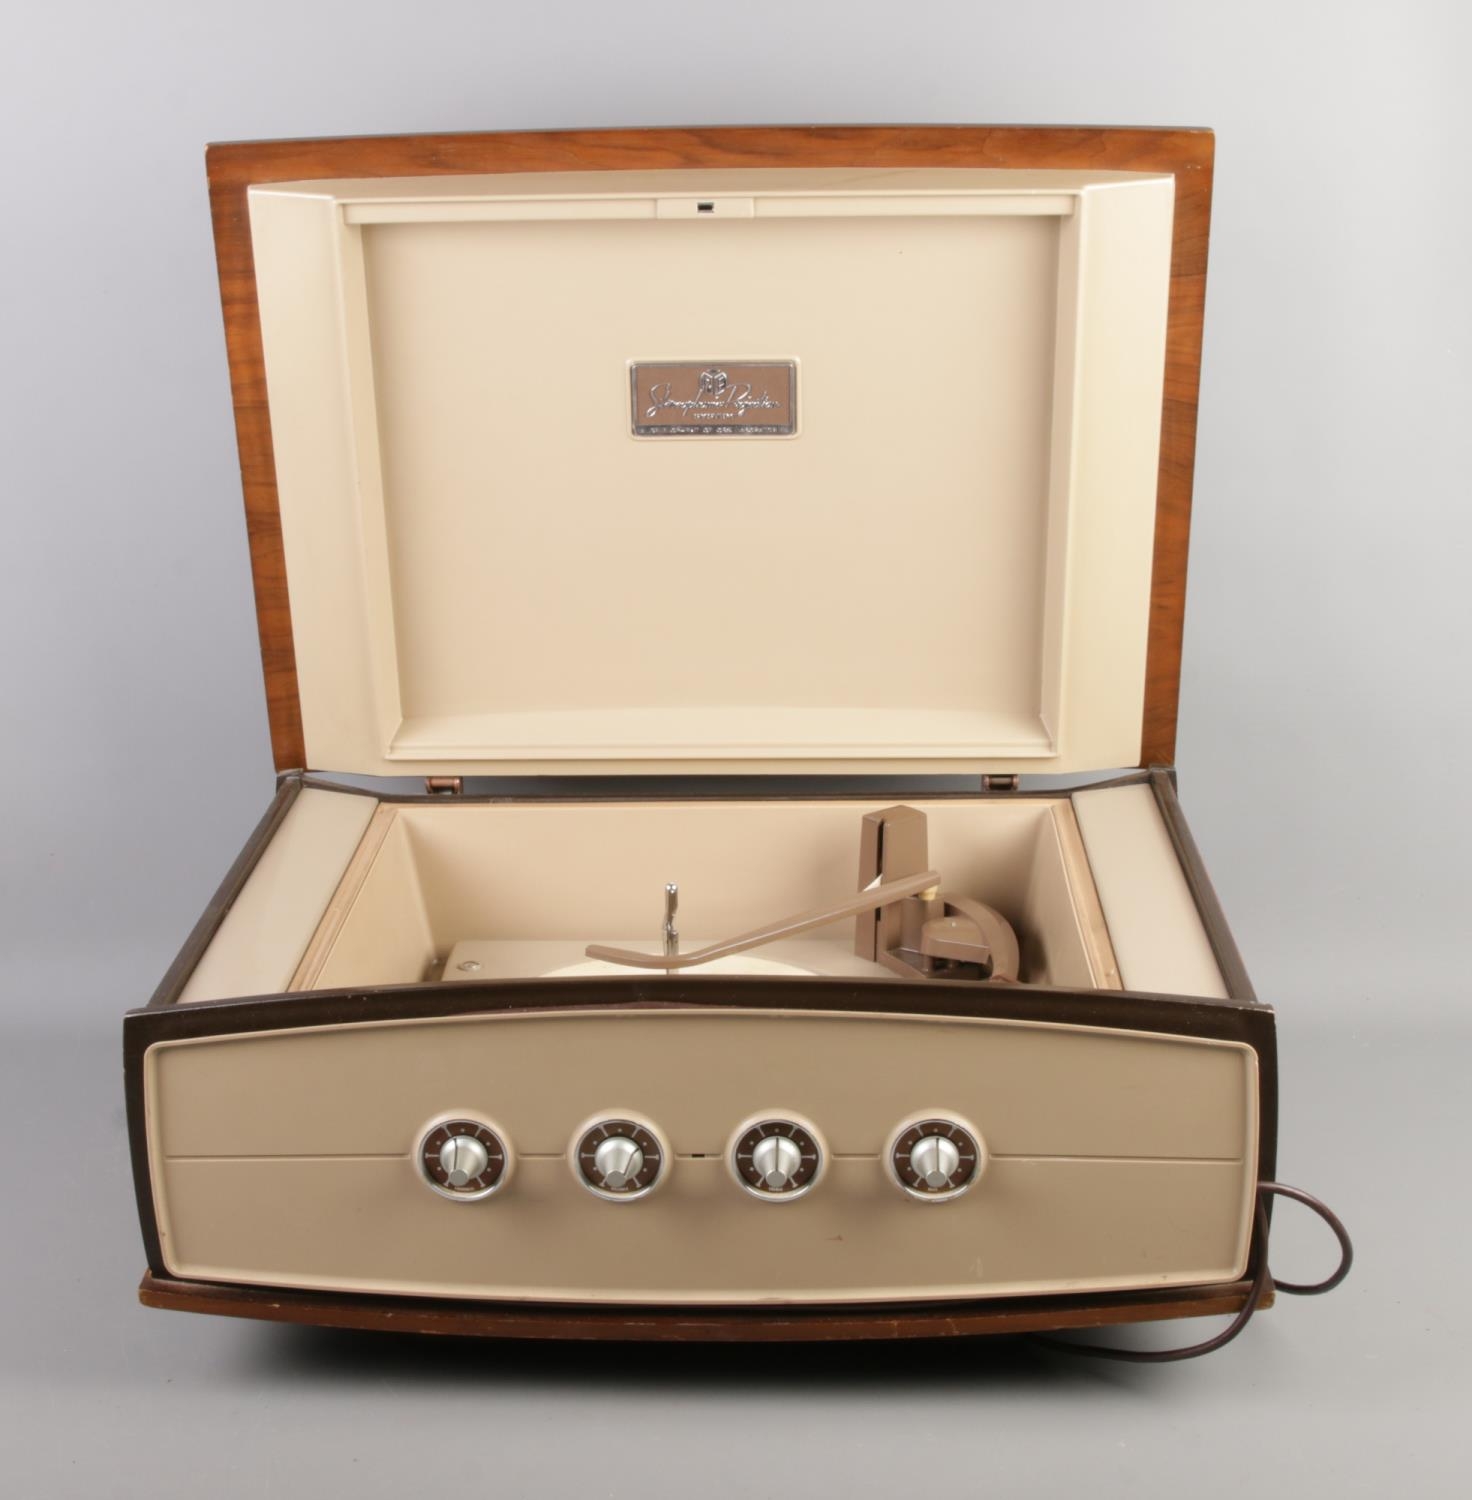 A PYE Stereophonic Projection System record player, Model 1005.